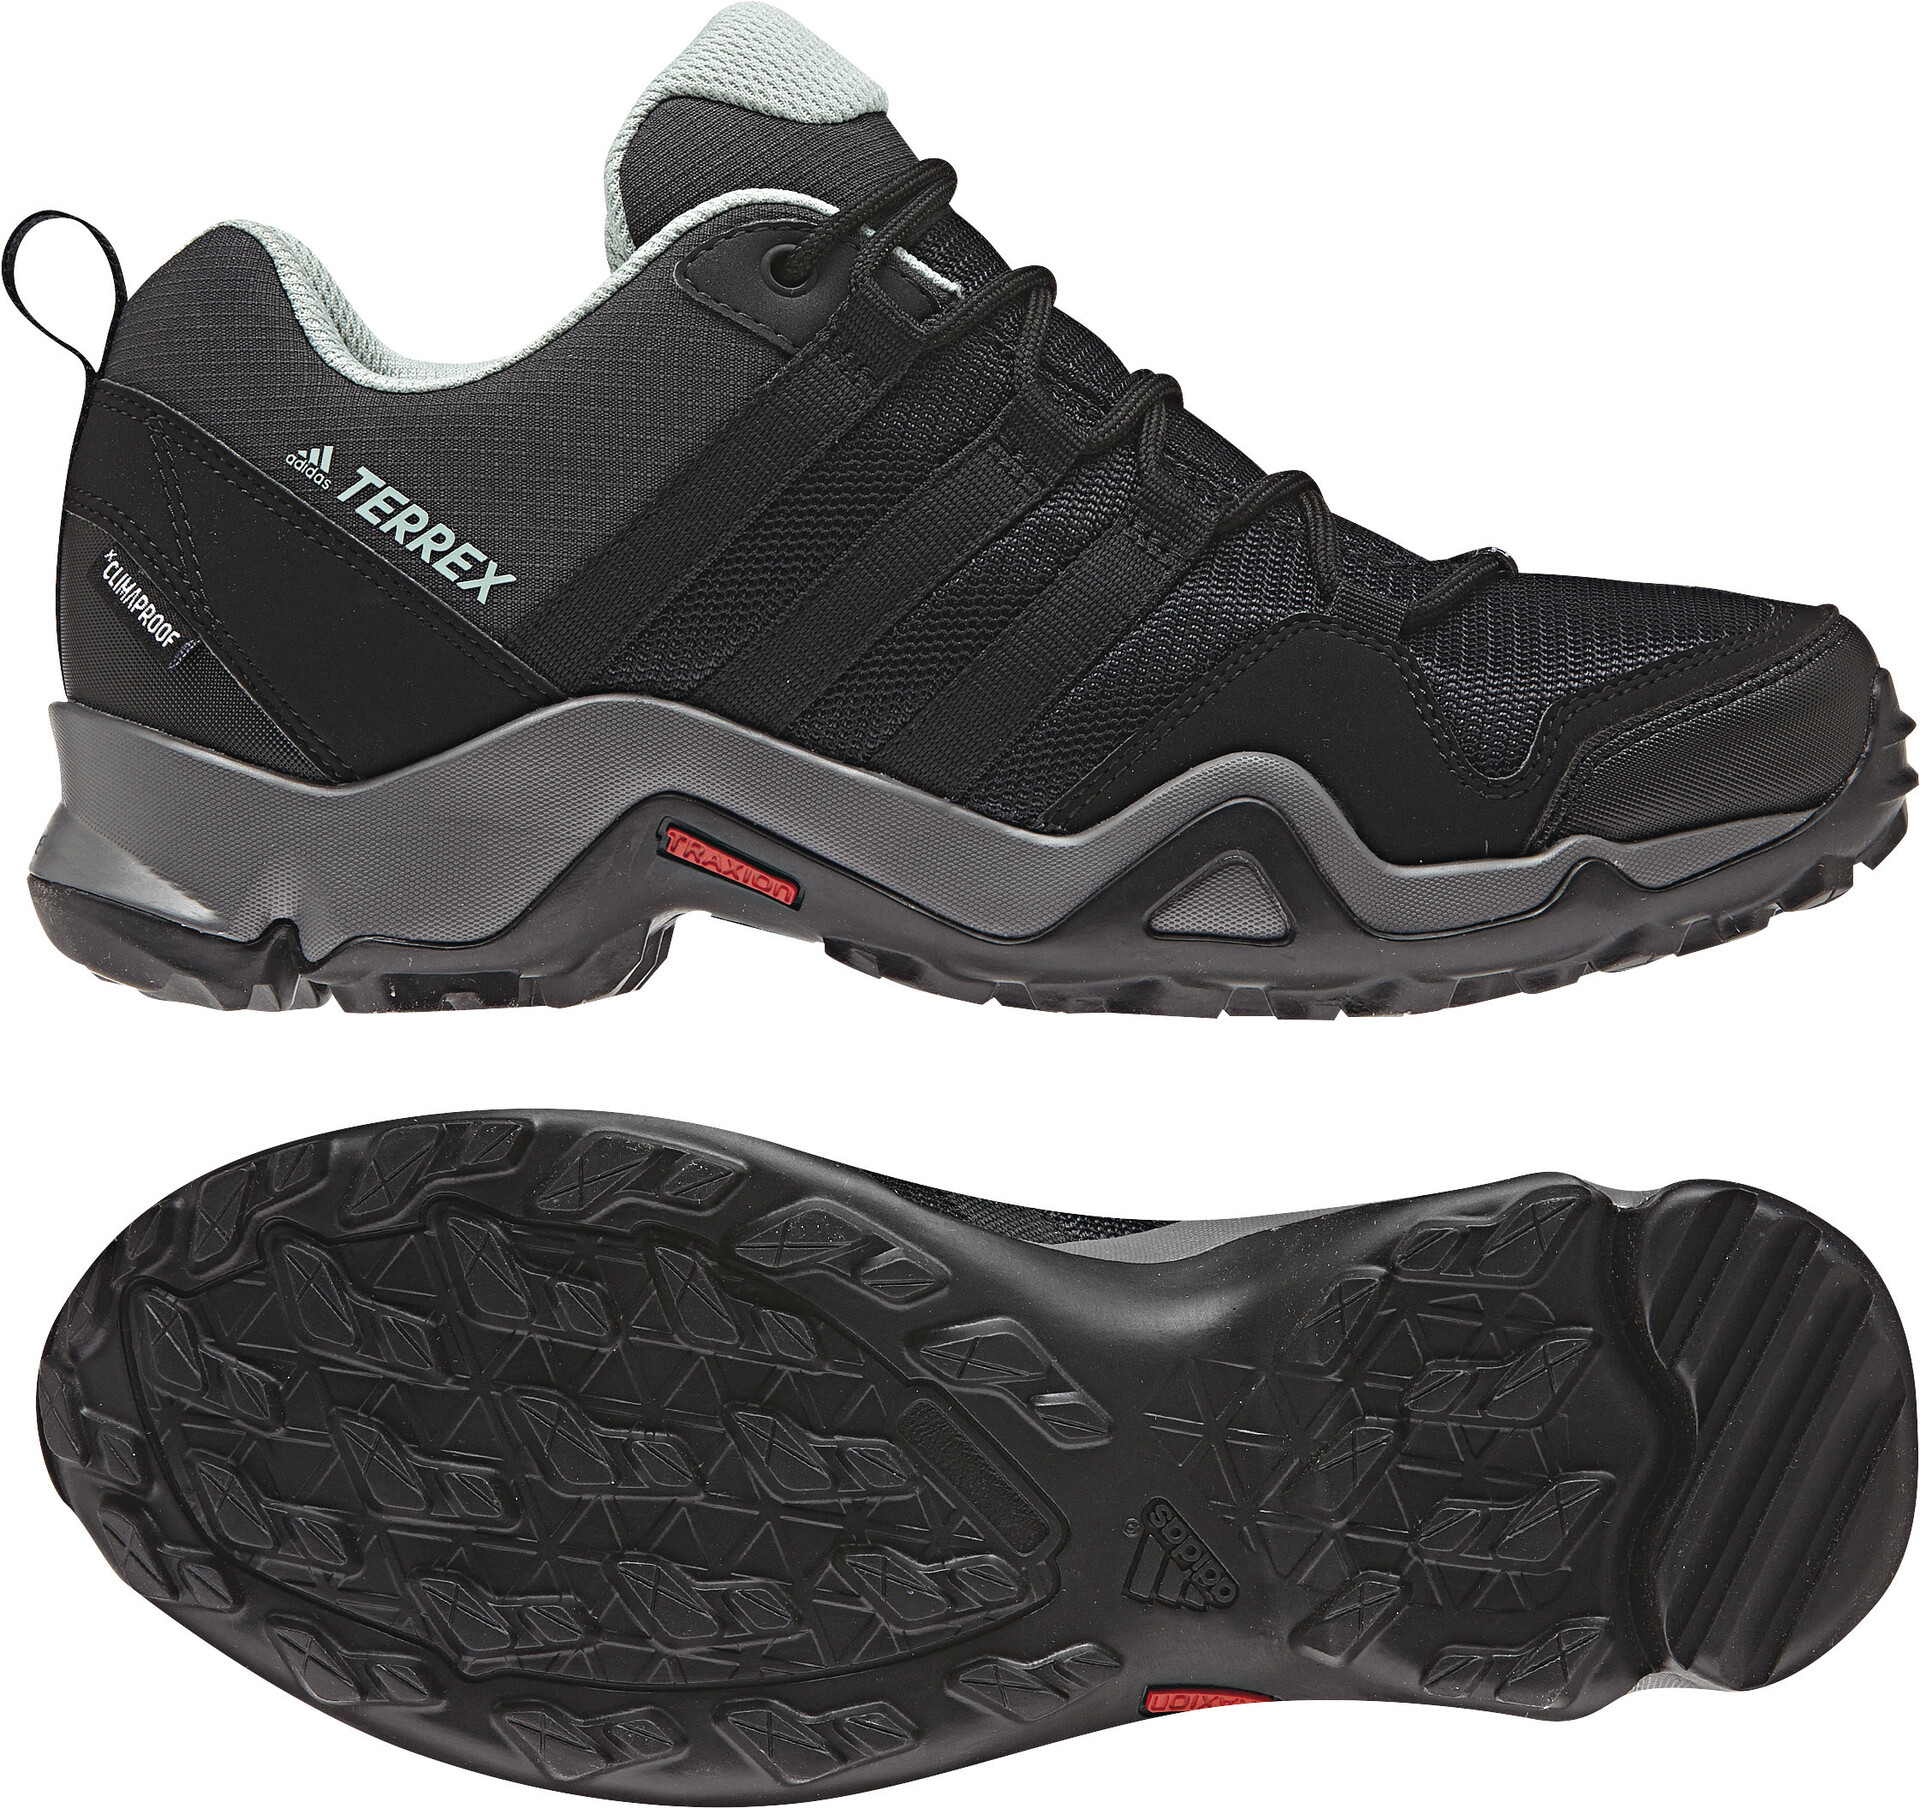 climaproof shoes